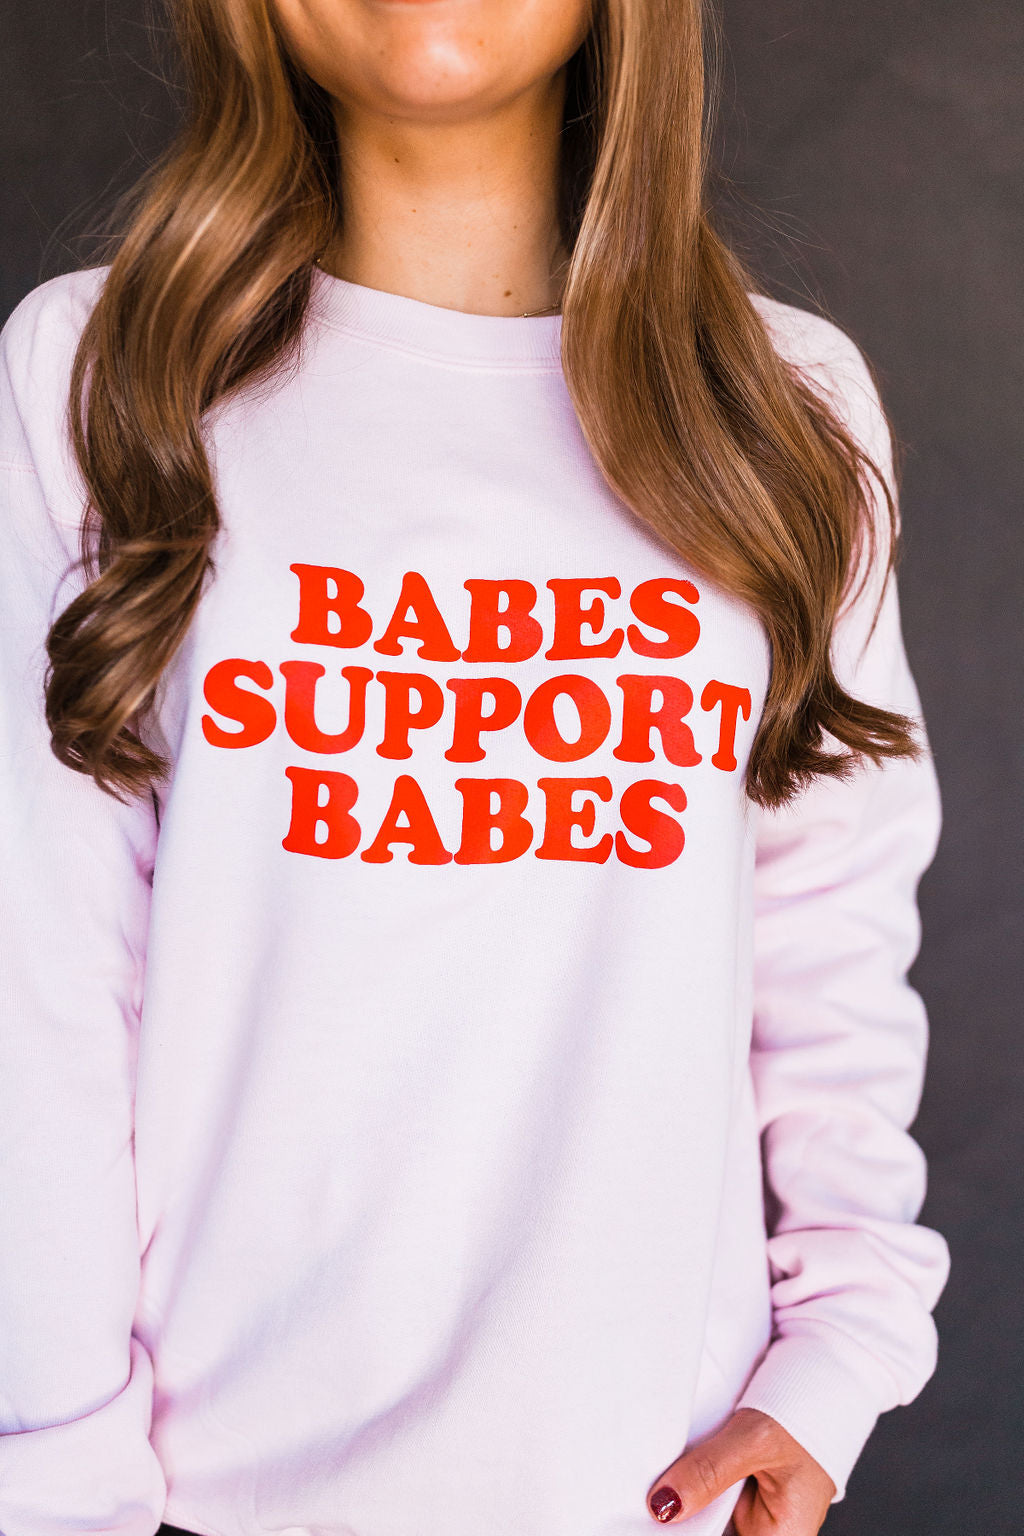 Babes Support Babes - Pink Sweatshirt with Red Ink